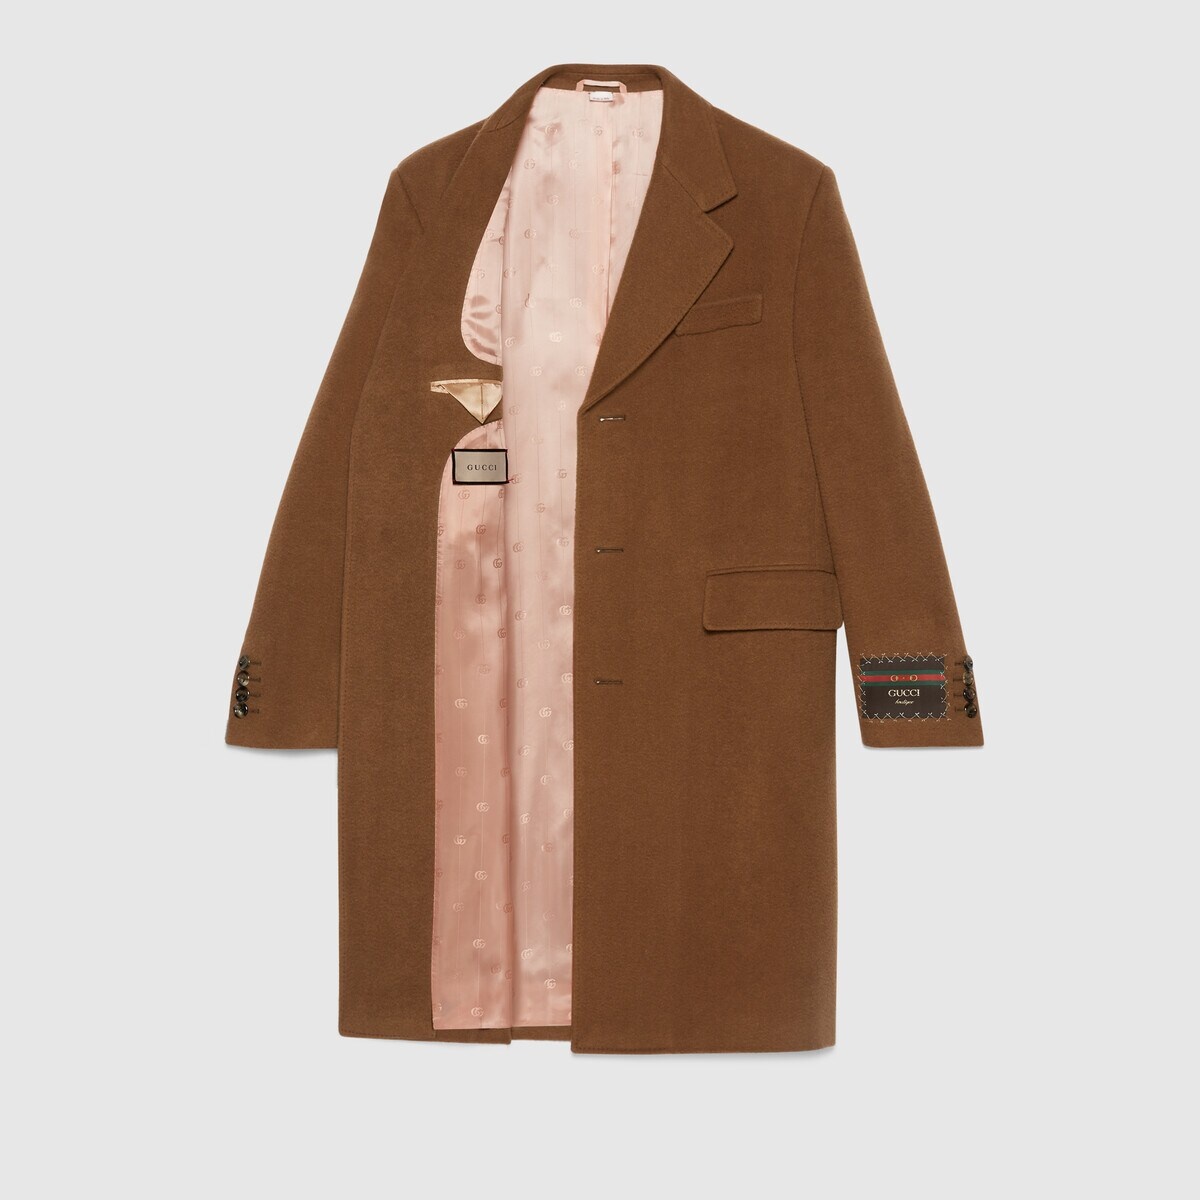 Wool coat with Gucci label - 2